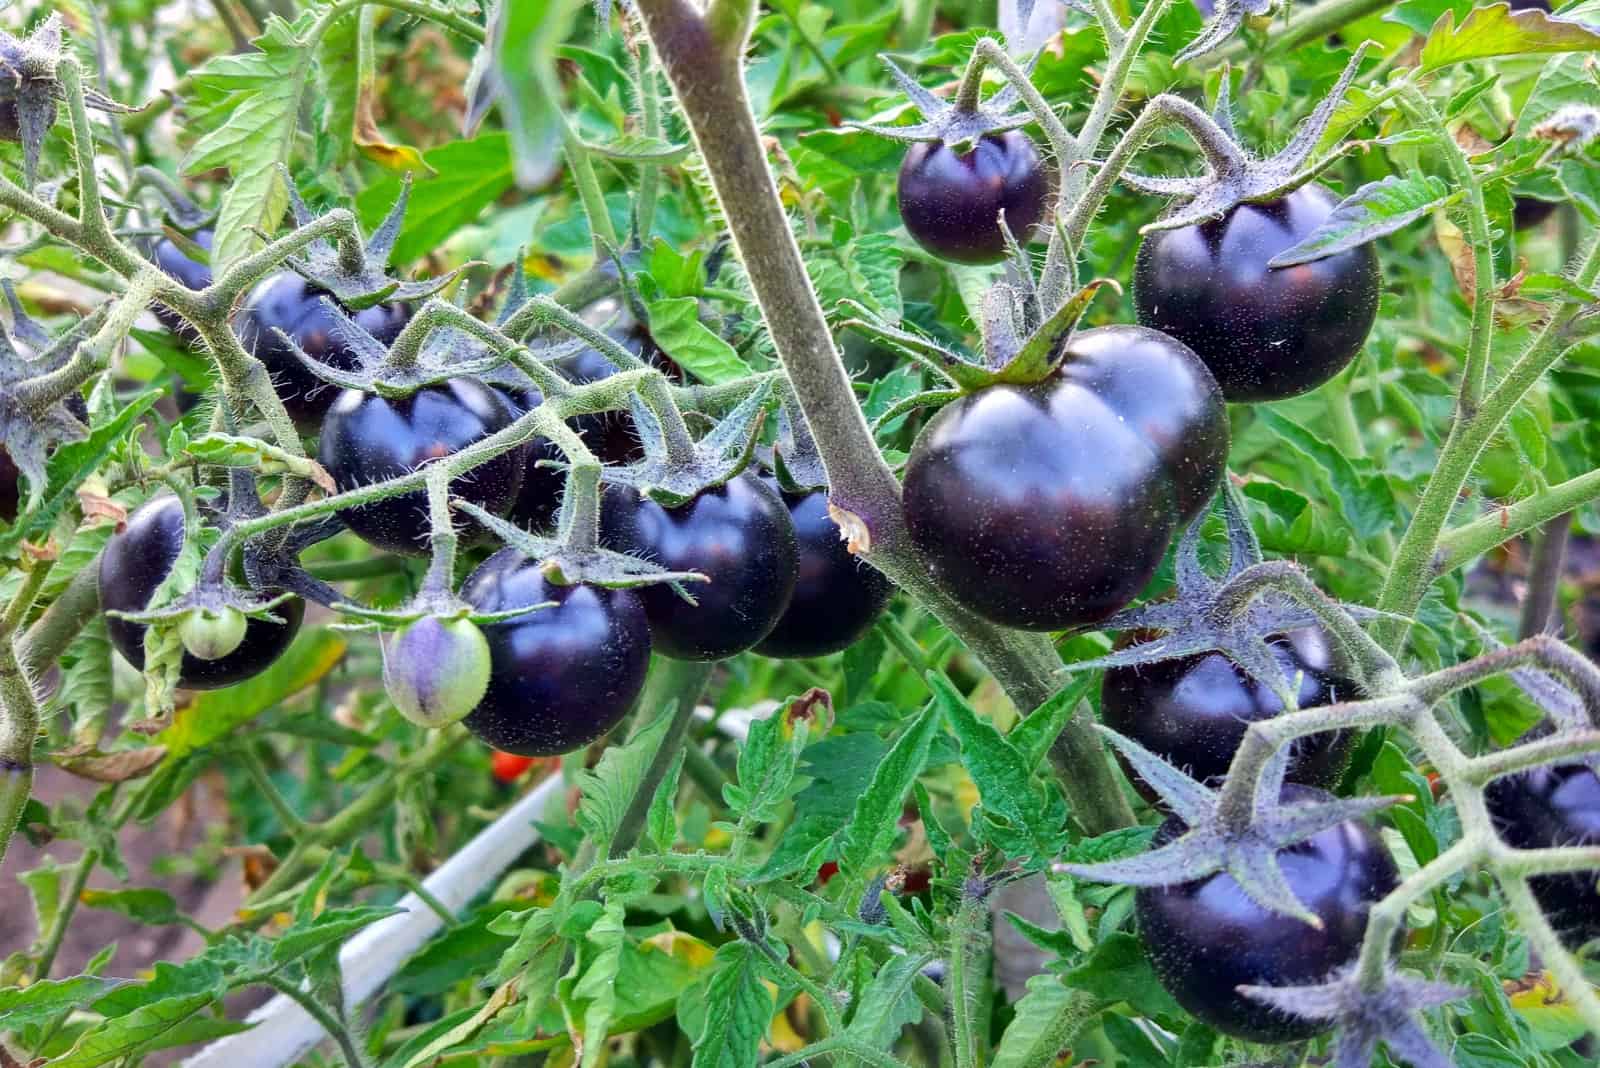 Black tomatoes on a branch in the garden